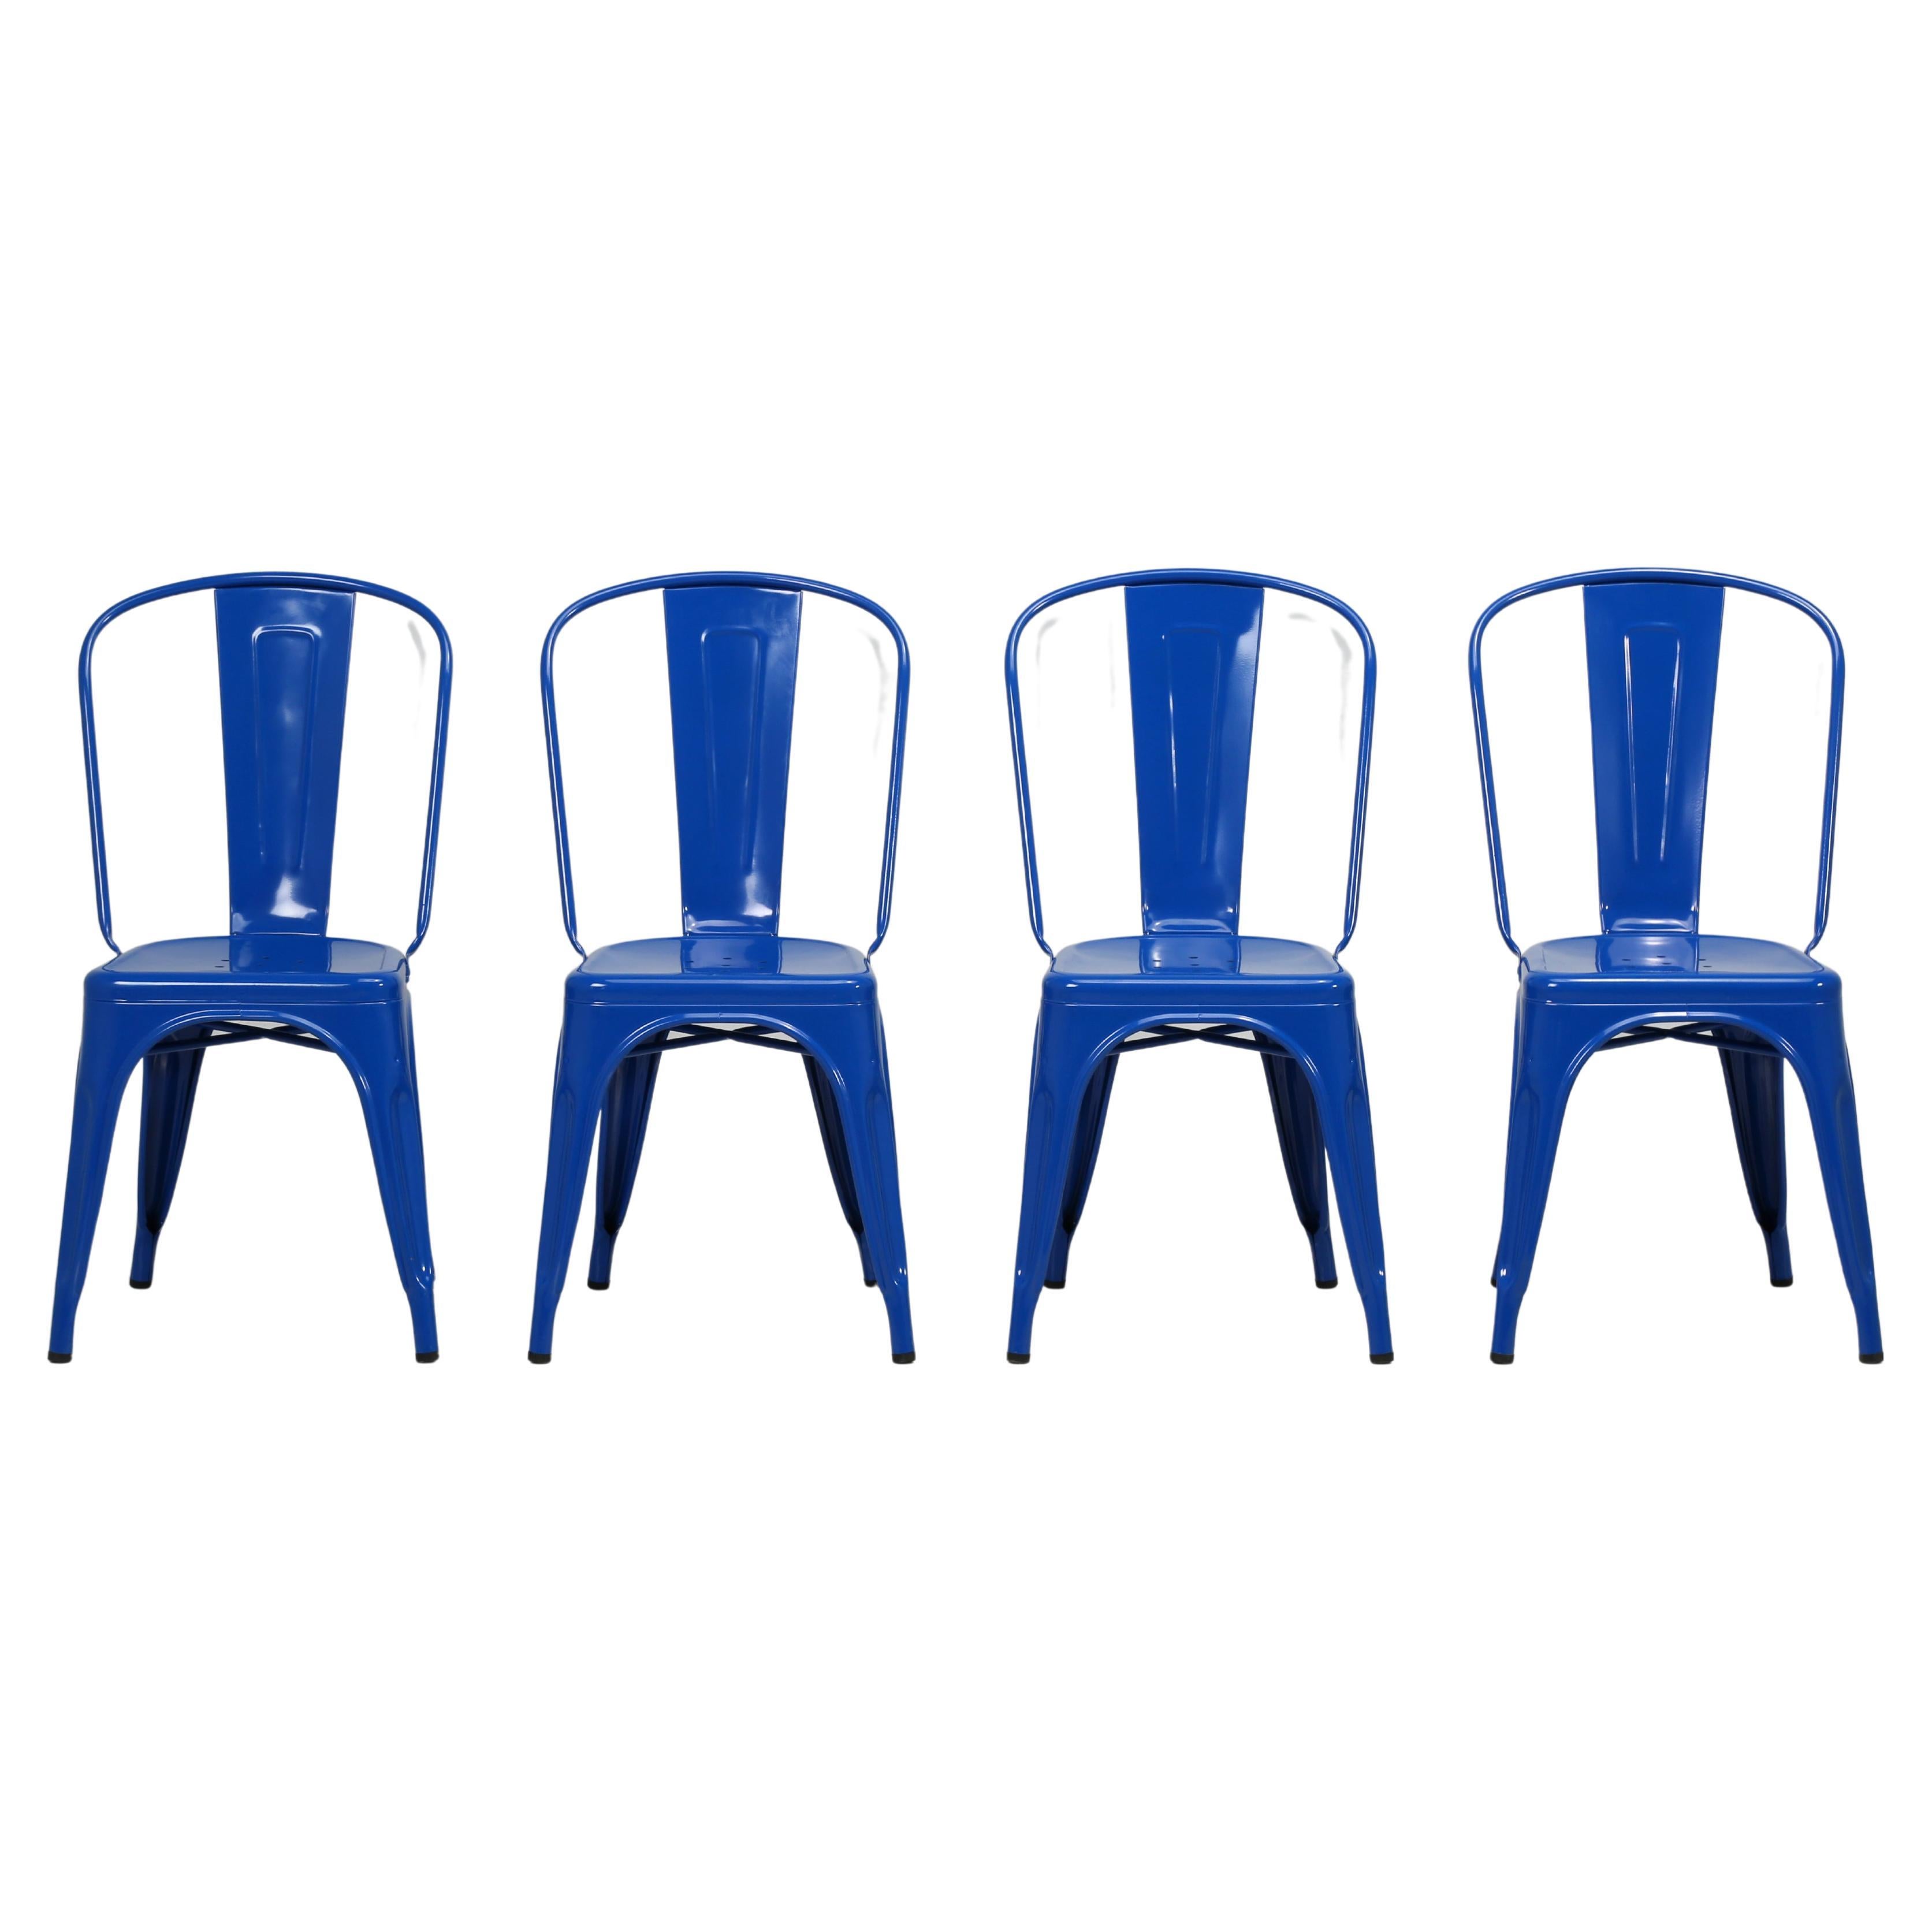 Genuine French Tolix Steel Stacking Chairs '4' Brilliant Blue Showroom Samples